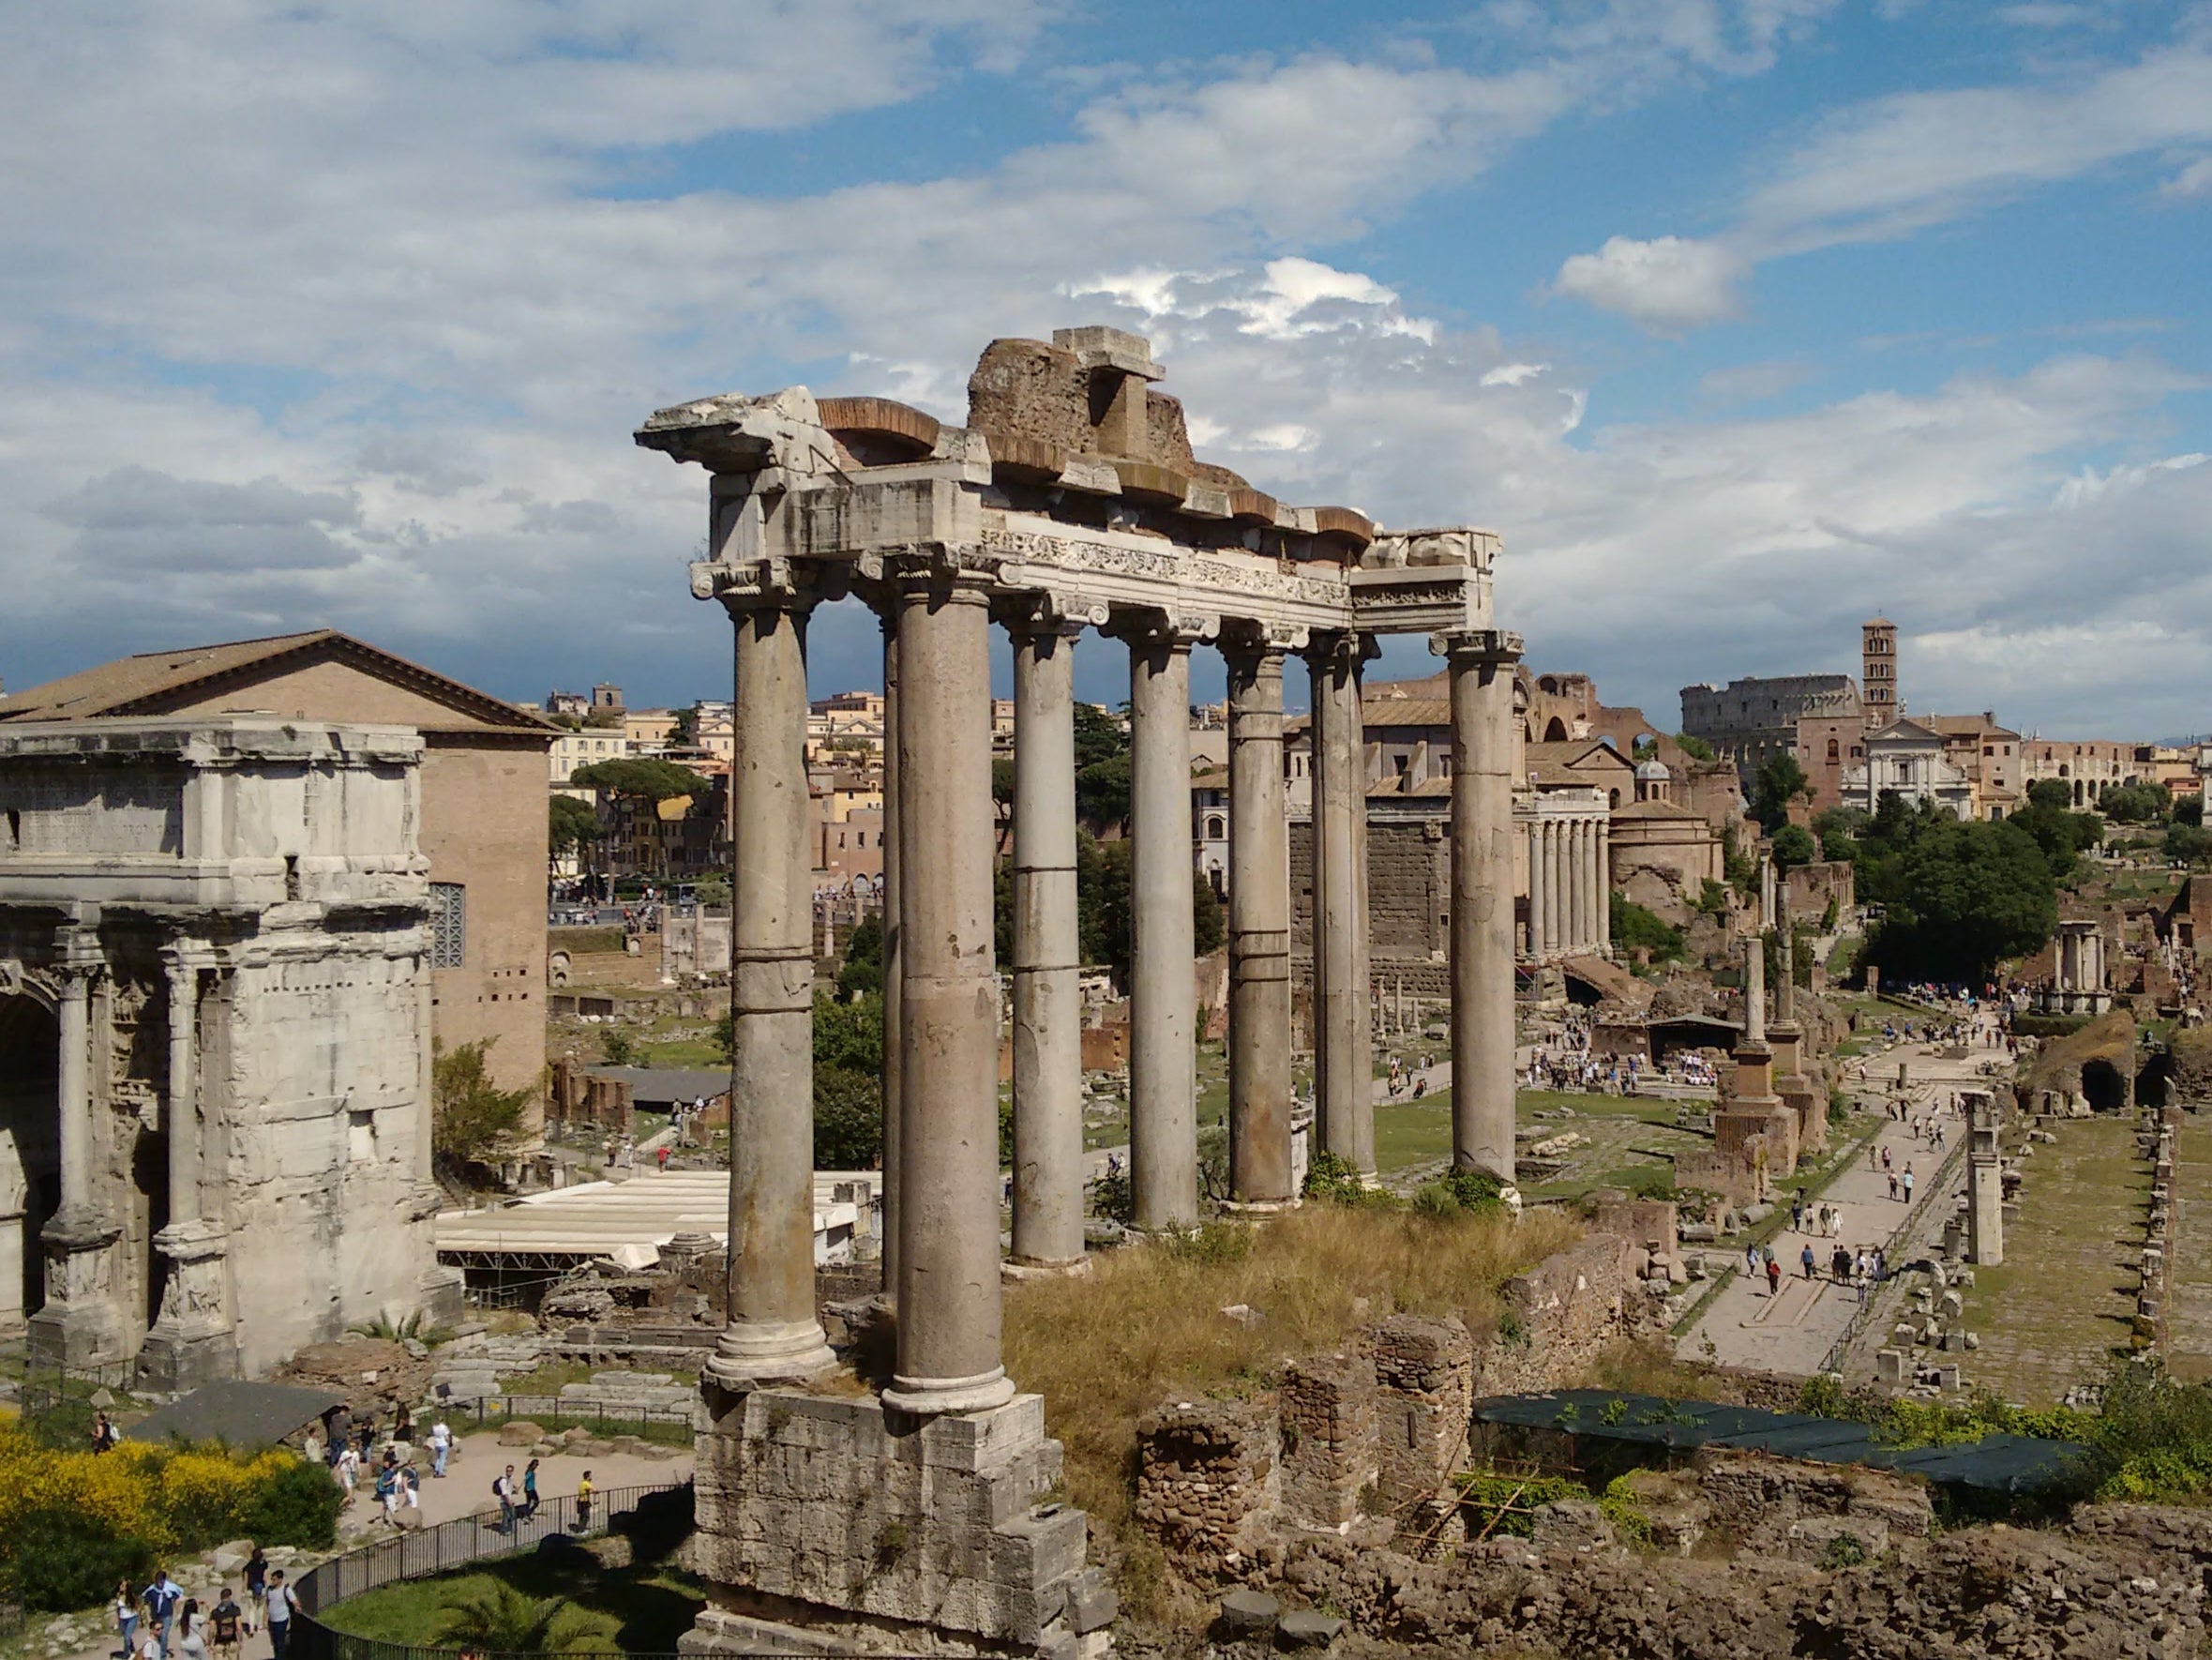 It was not clear where the artefact was from that the American tourist stole, but it was believed to potentially be marble from the Roman Forum (pictured)